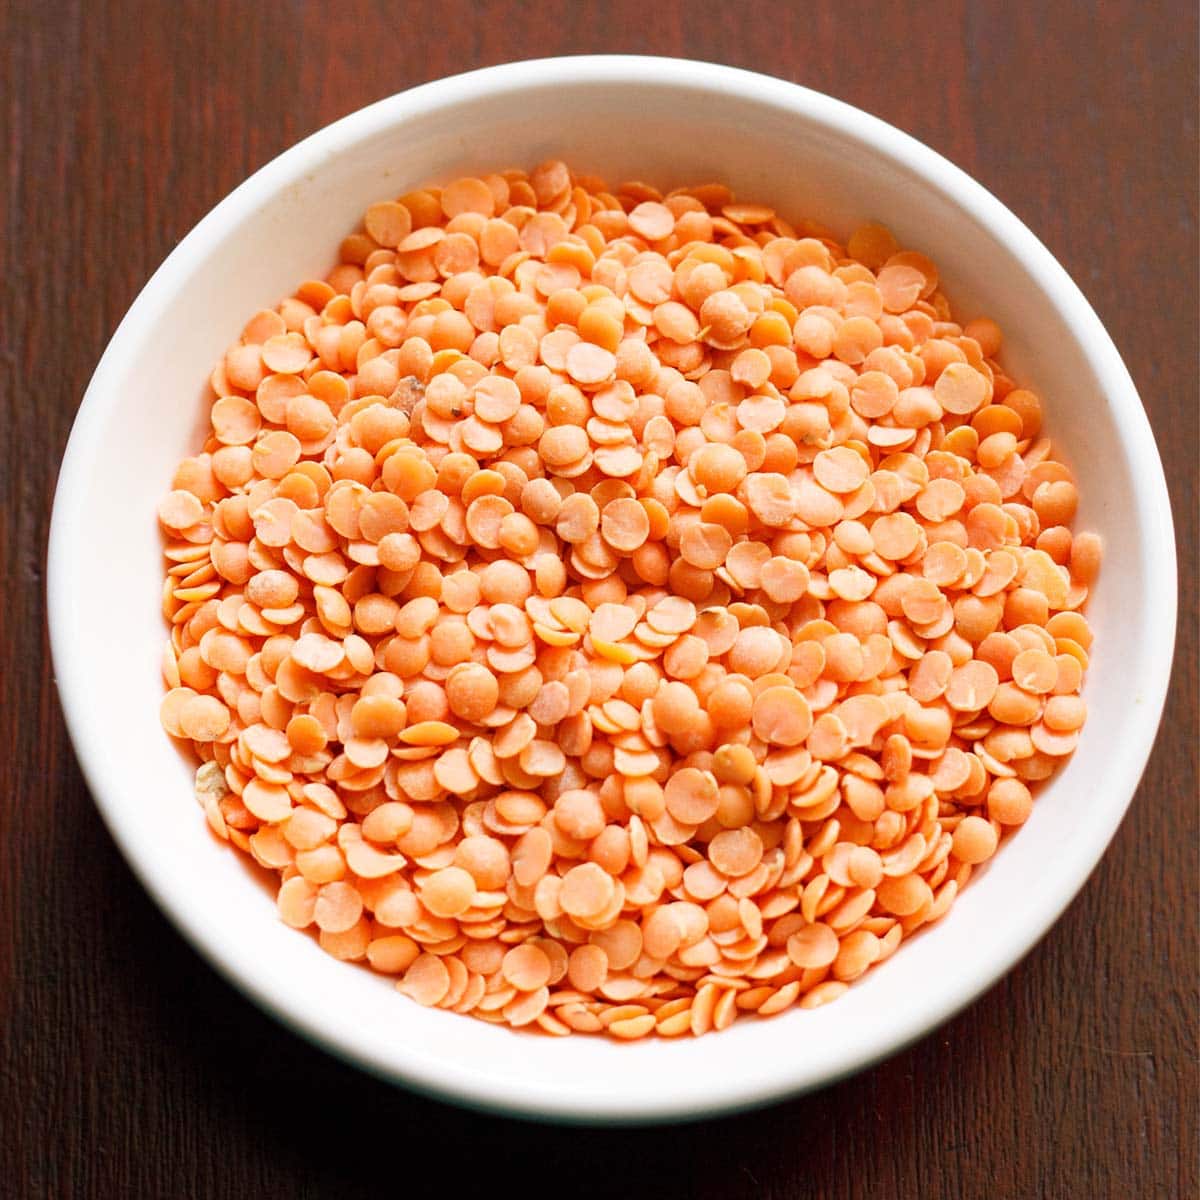 masoor dal or red lentils in a white bowl.